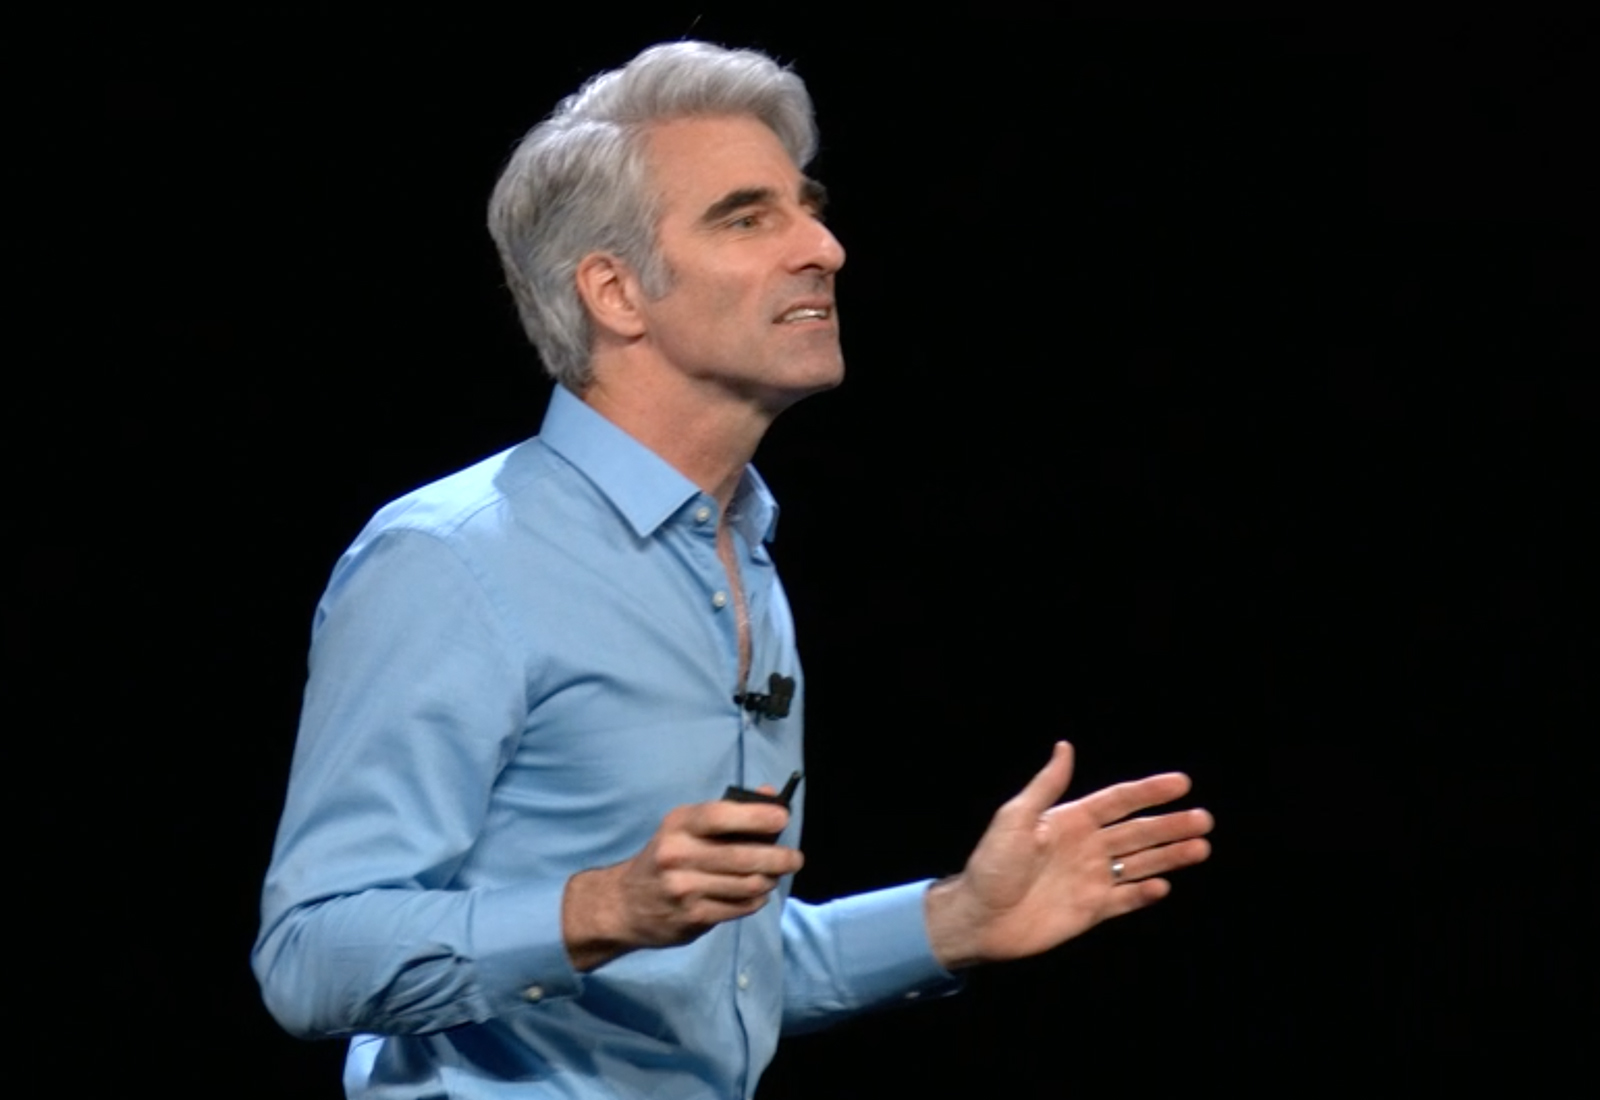 Apple's Software Engineering VP offers advice to up-and-coming coders